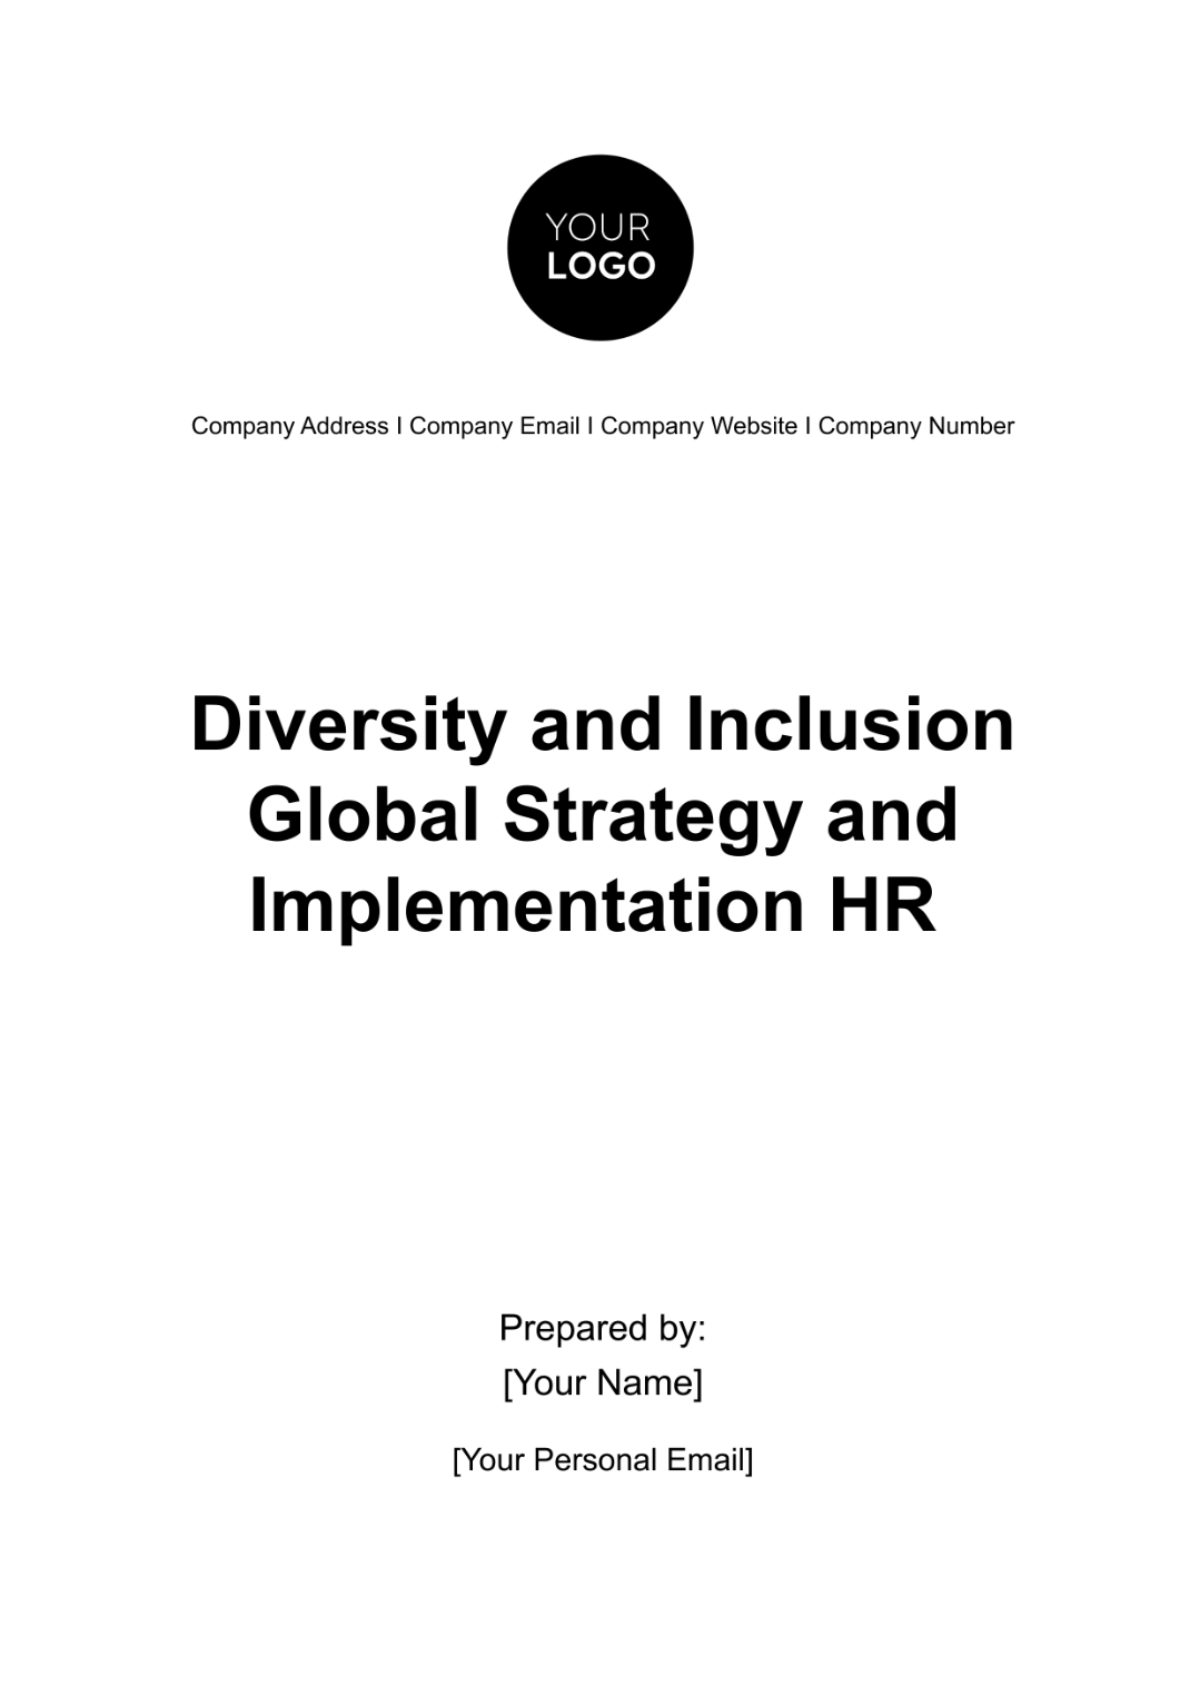 Free Diversity and Inclusion Global Strategy and Implementation HR Template